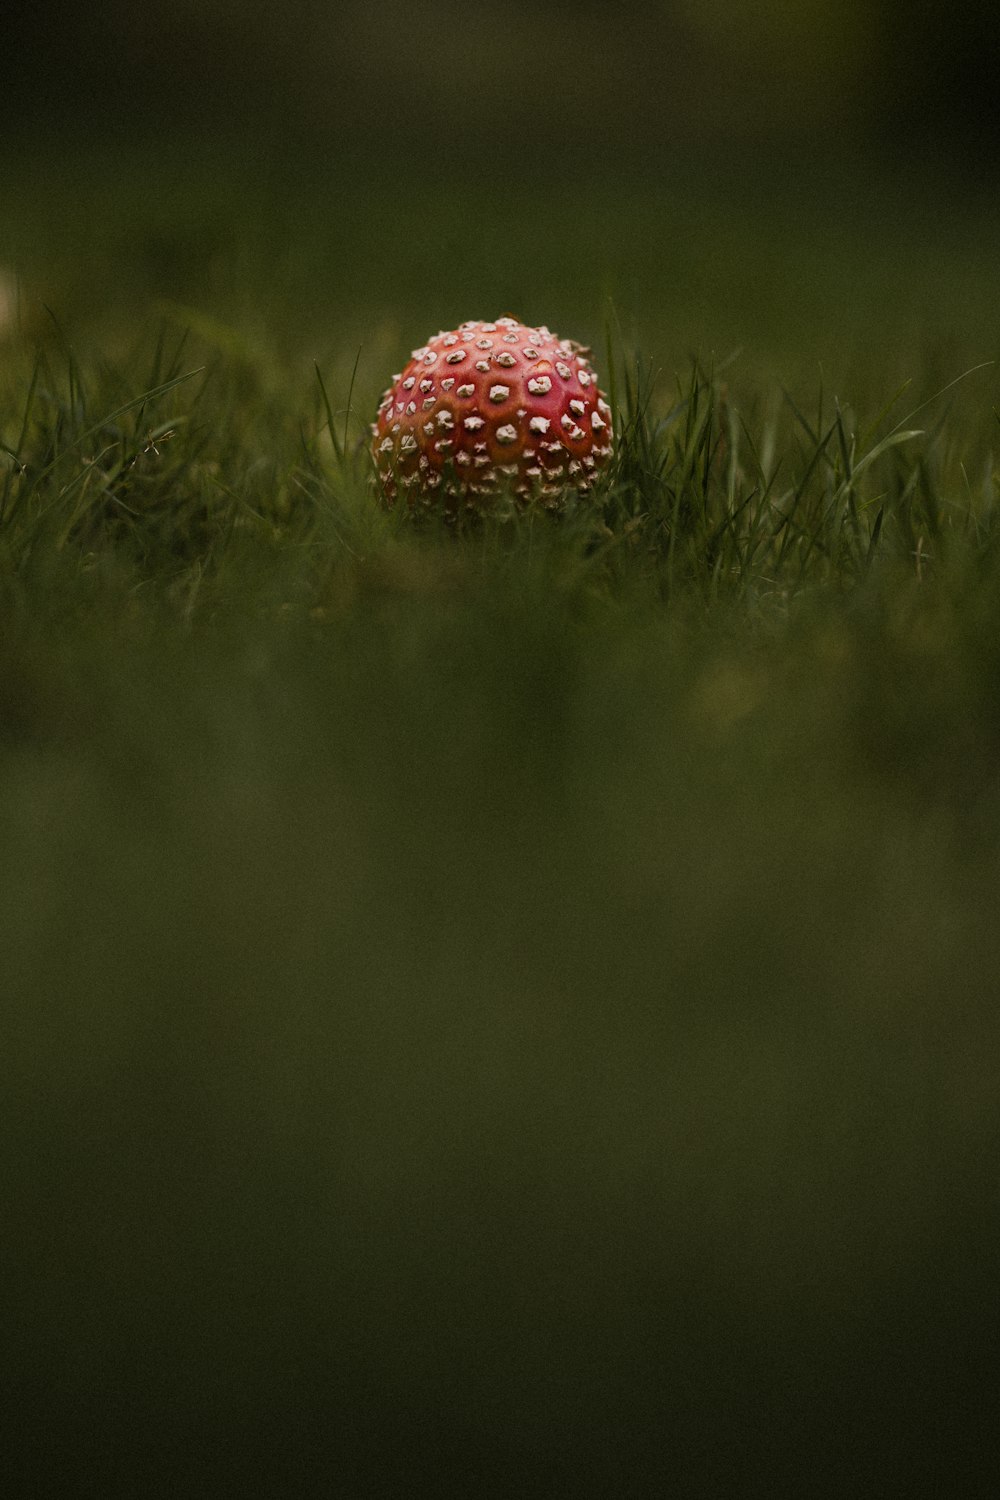 red and white polka dot mushroom on green grass field